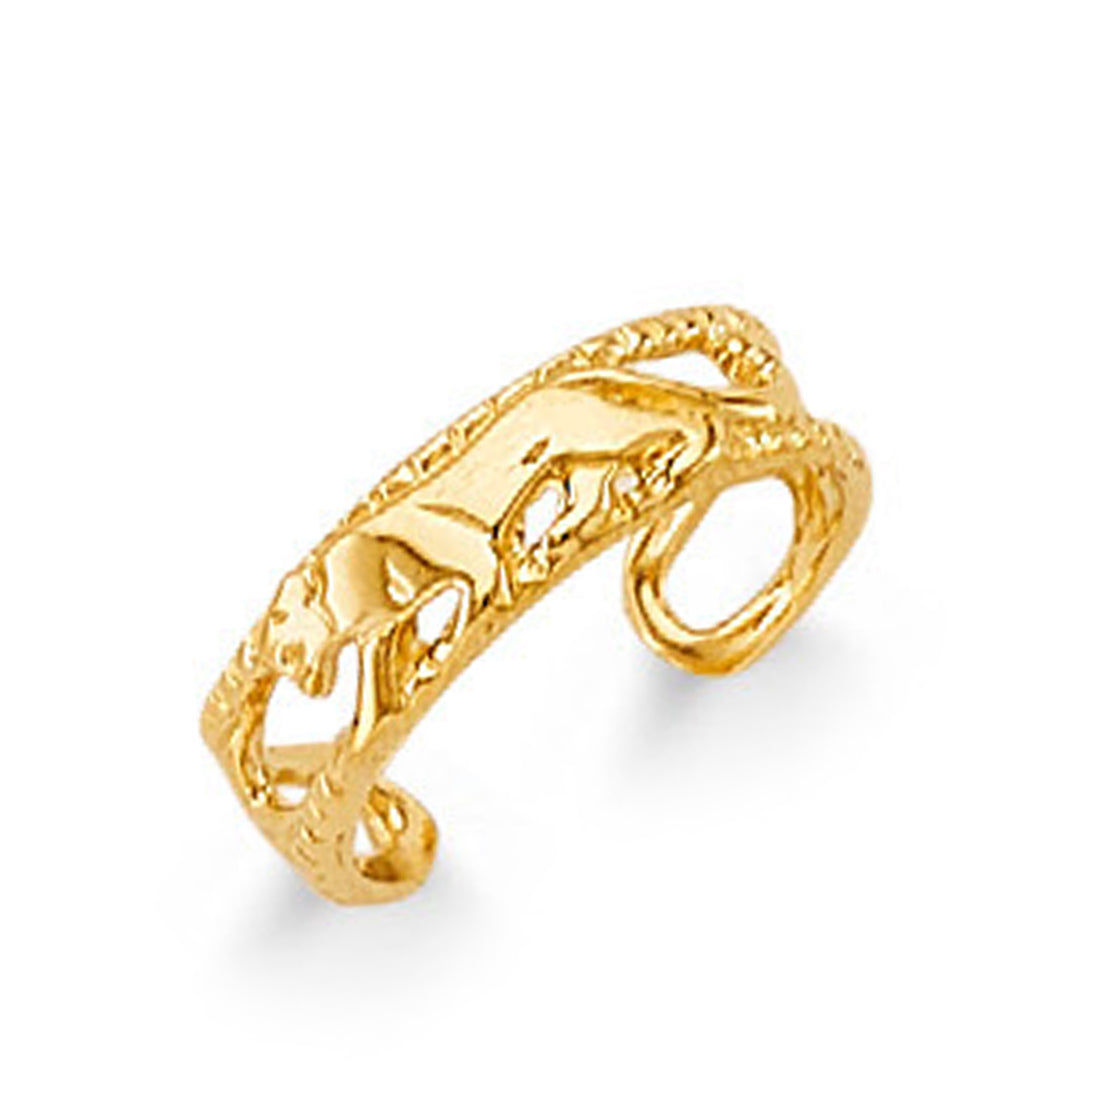 Stylish Filigree Fashionable Ring in Solid Gold 